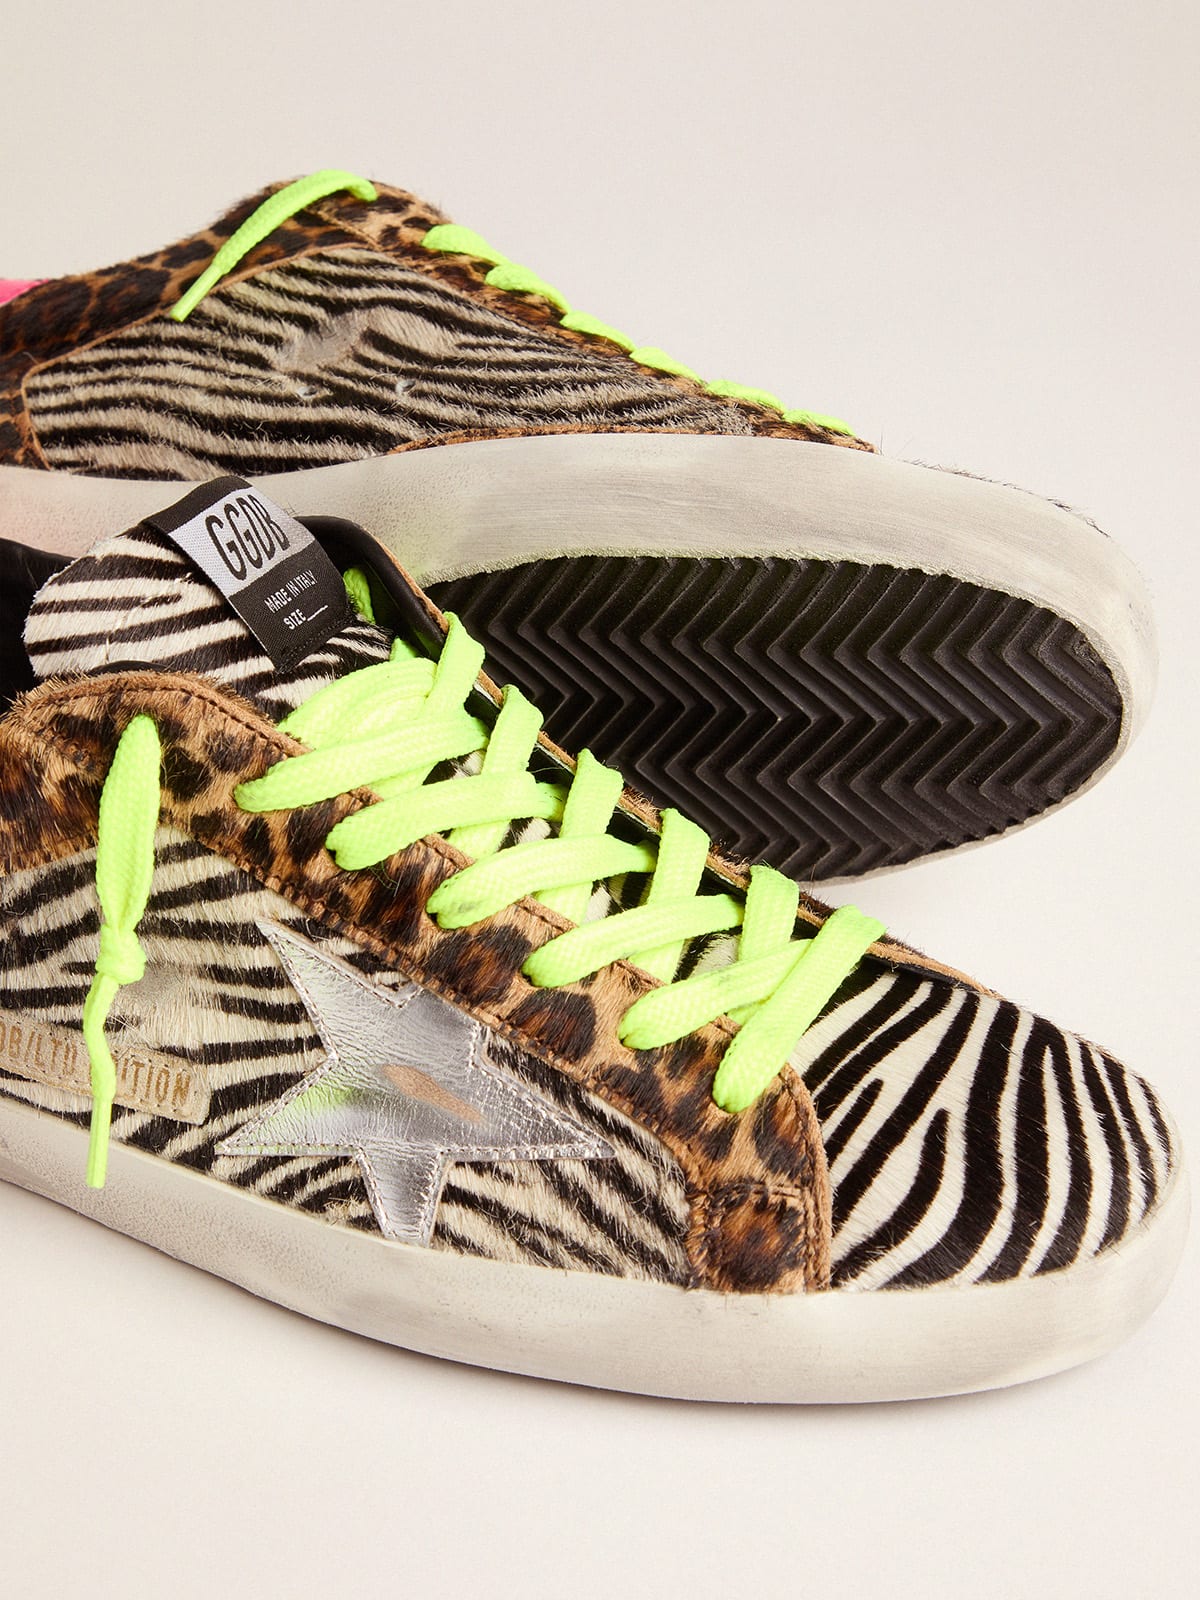 Golden Goose - Men's Limited Edition LAB glitter animal-print Super-Star sneakers in 